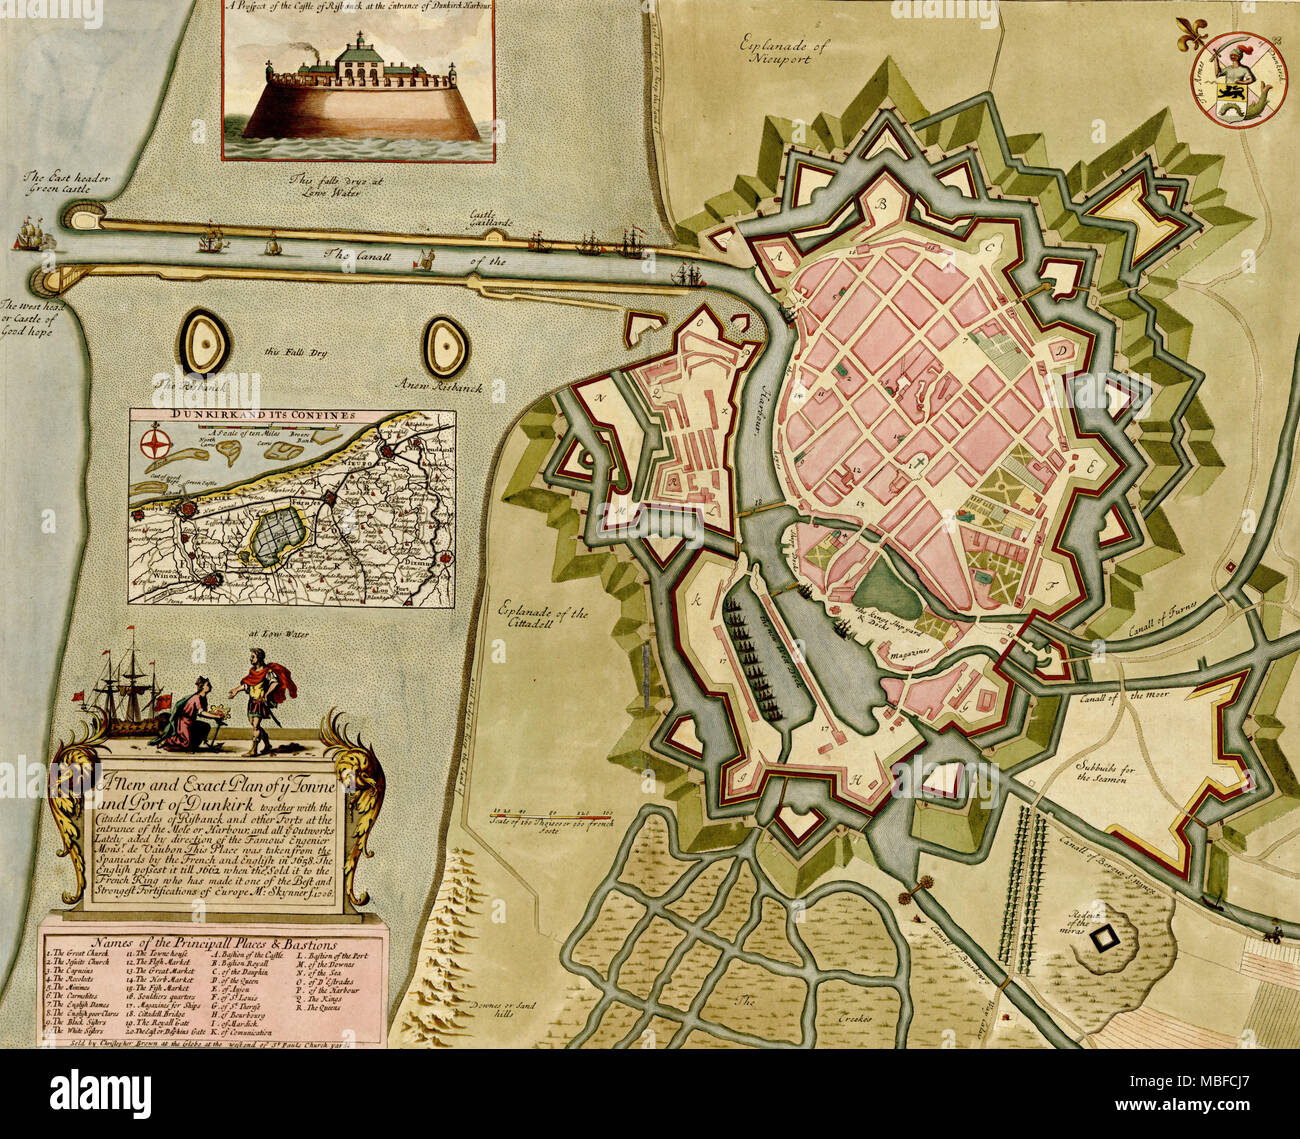 Survey of London, Westminster, and Southwark - 1700 Stock Photo